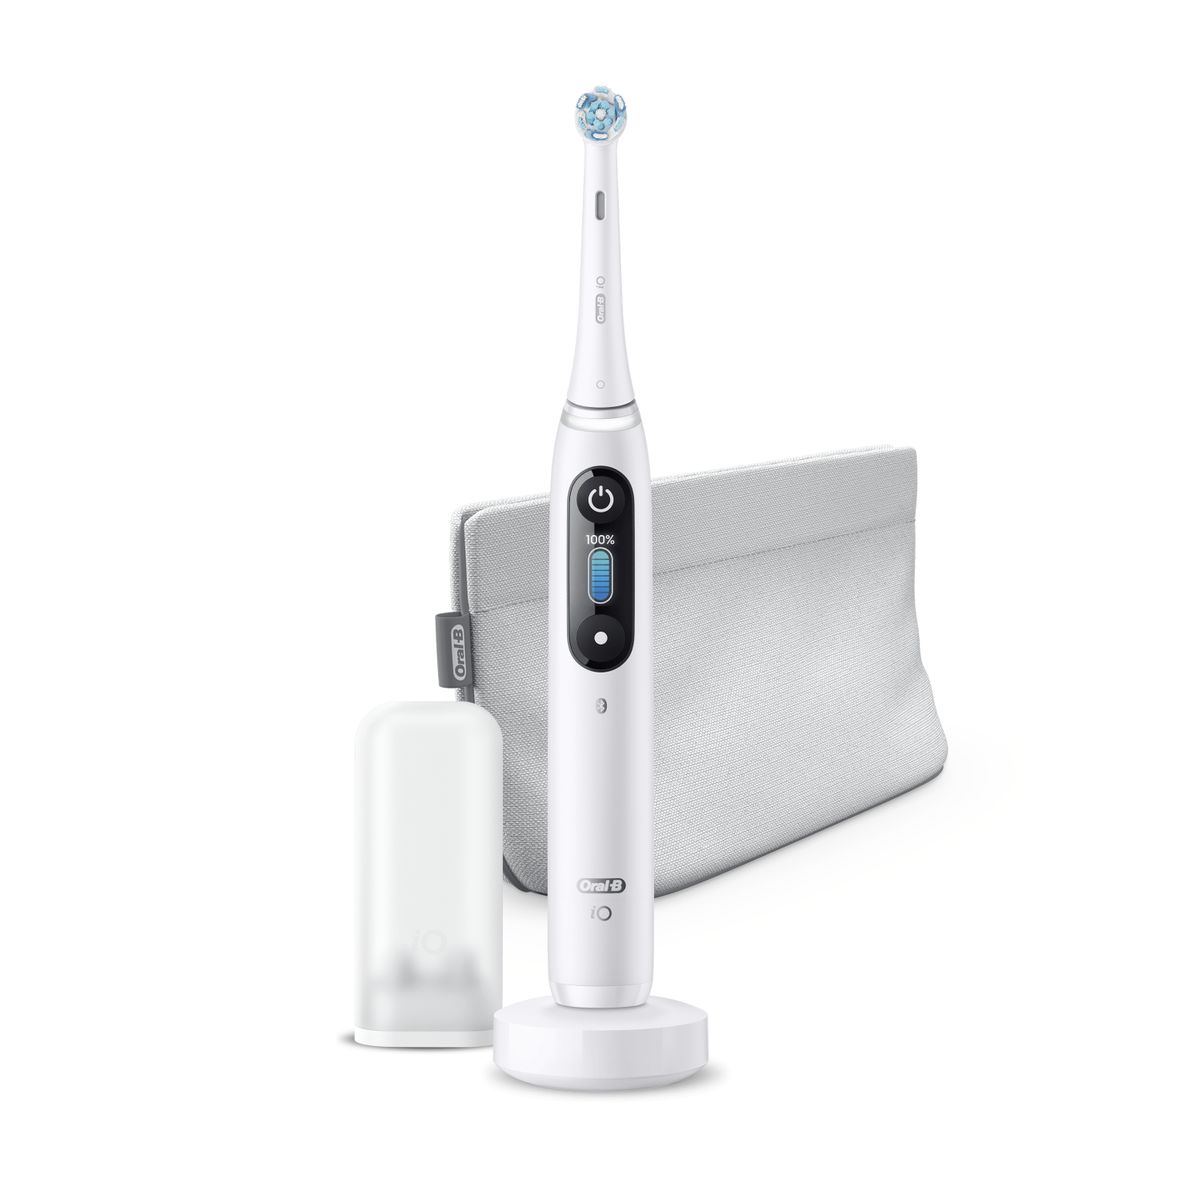 Oral-B iO 8 Special Edition Electric Toothbrush/Electric Toothbrush with Revolutionary Magnetic Technology and Micro Vibrations, 6 Cleaning Programs, Colour Display